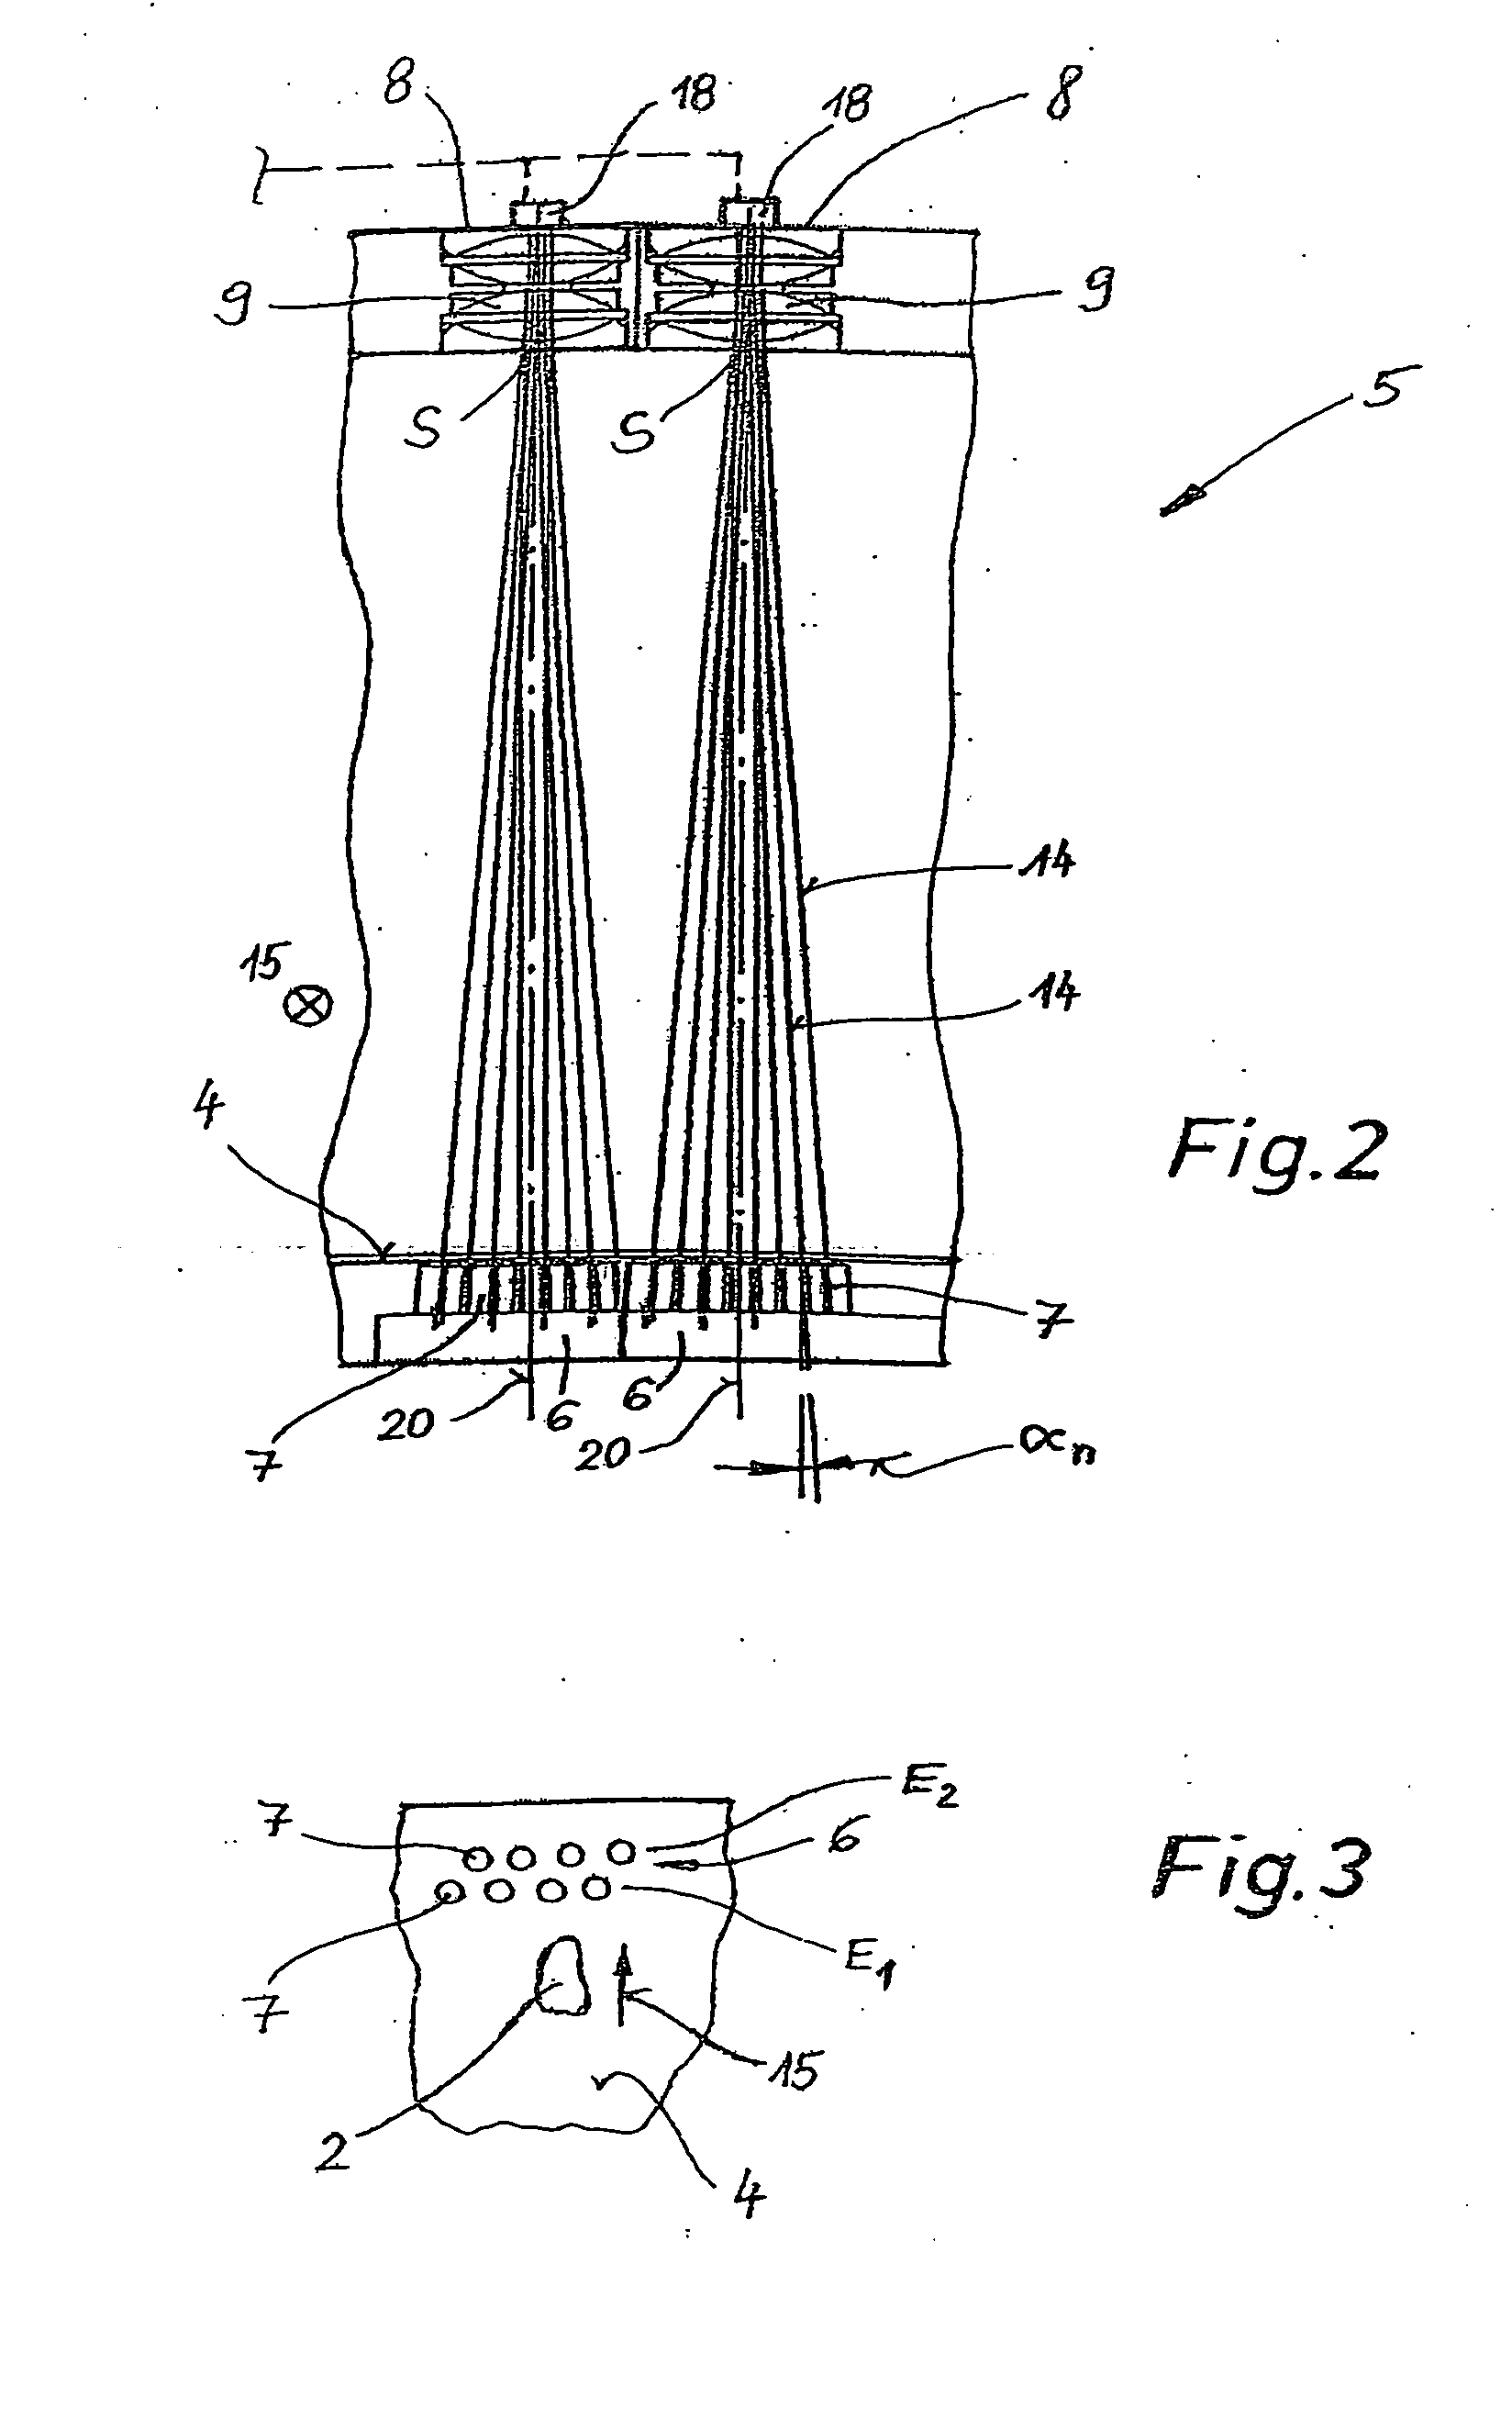 Method for Detecting and Removing Foreign Bodies